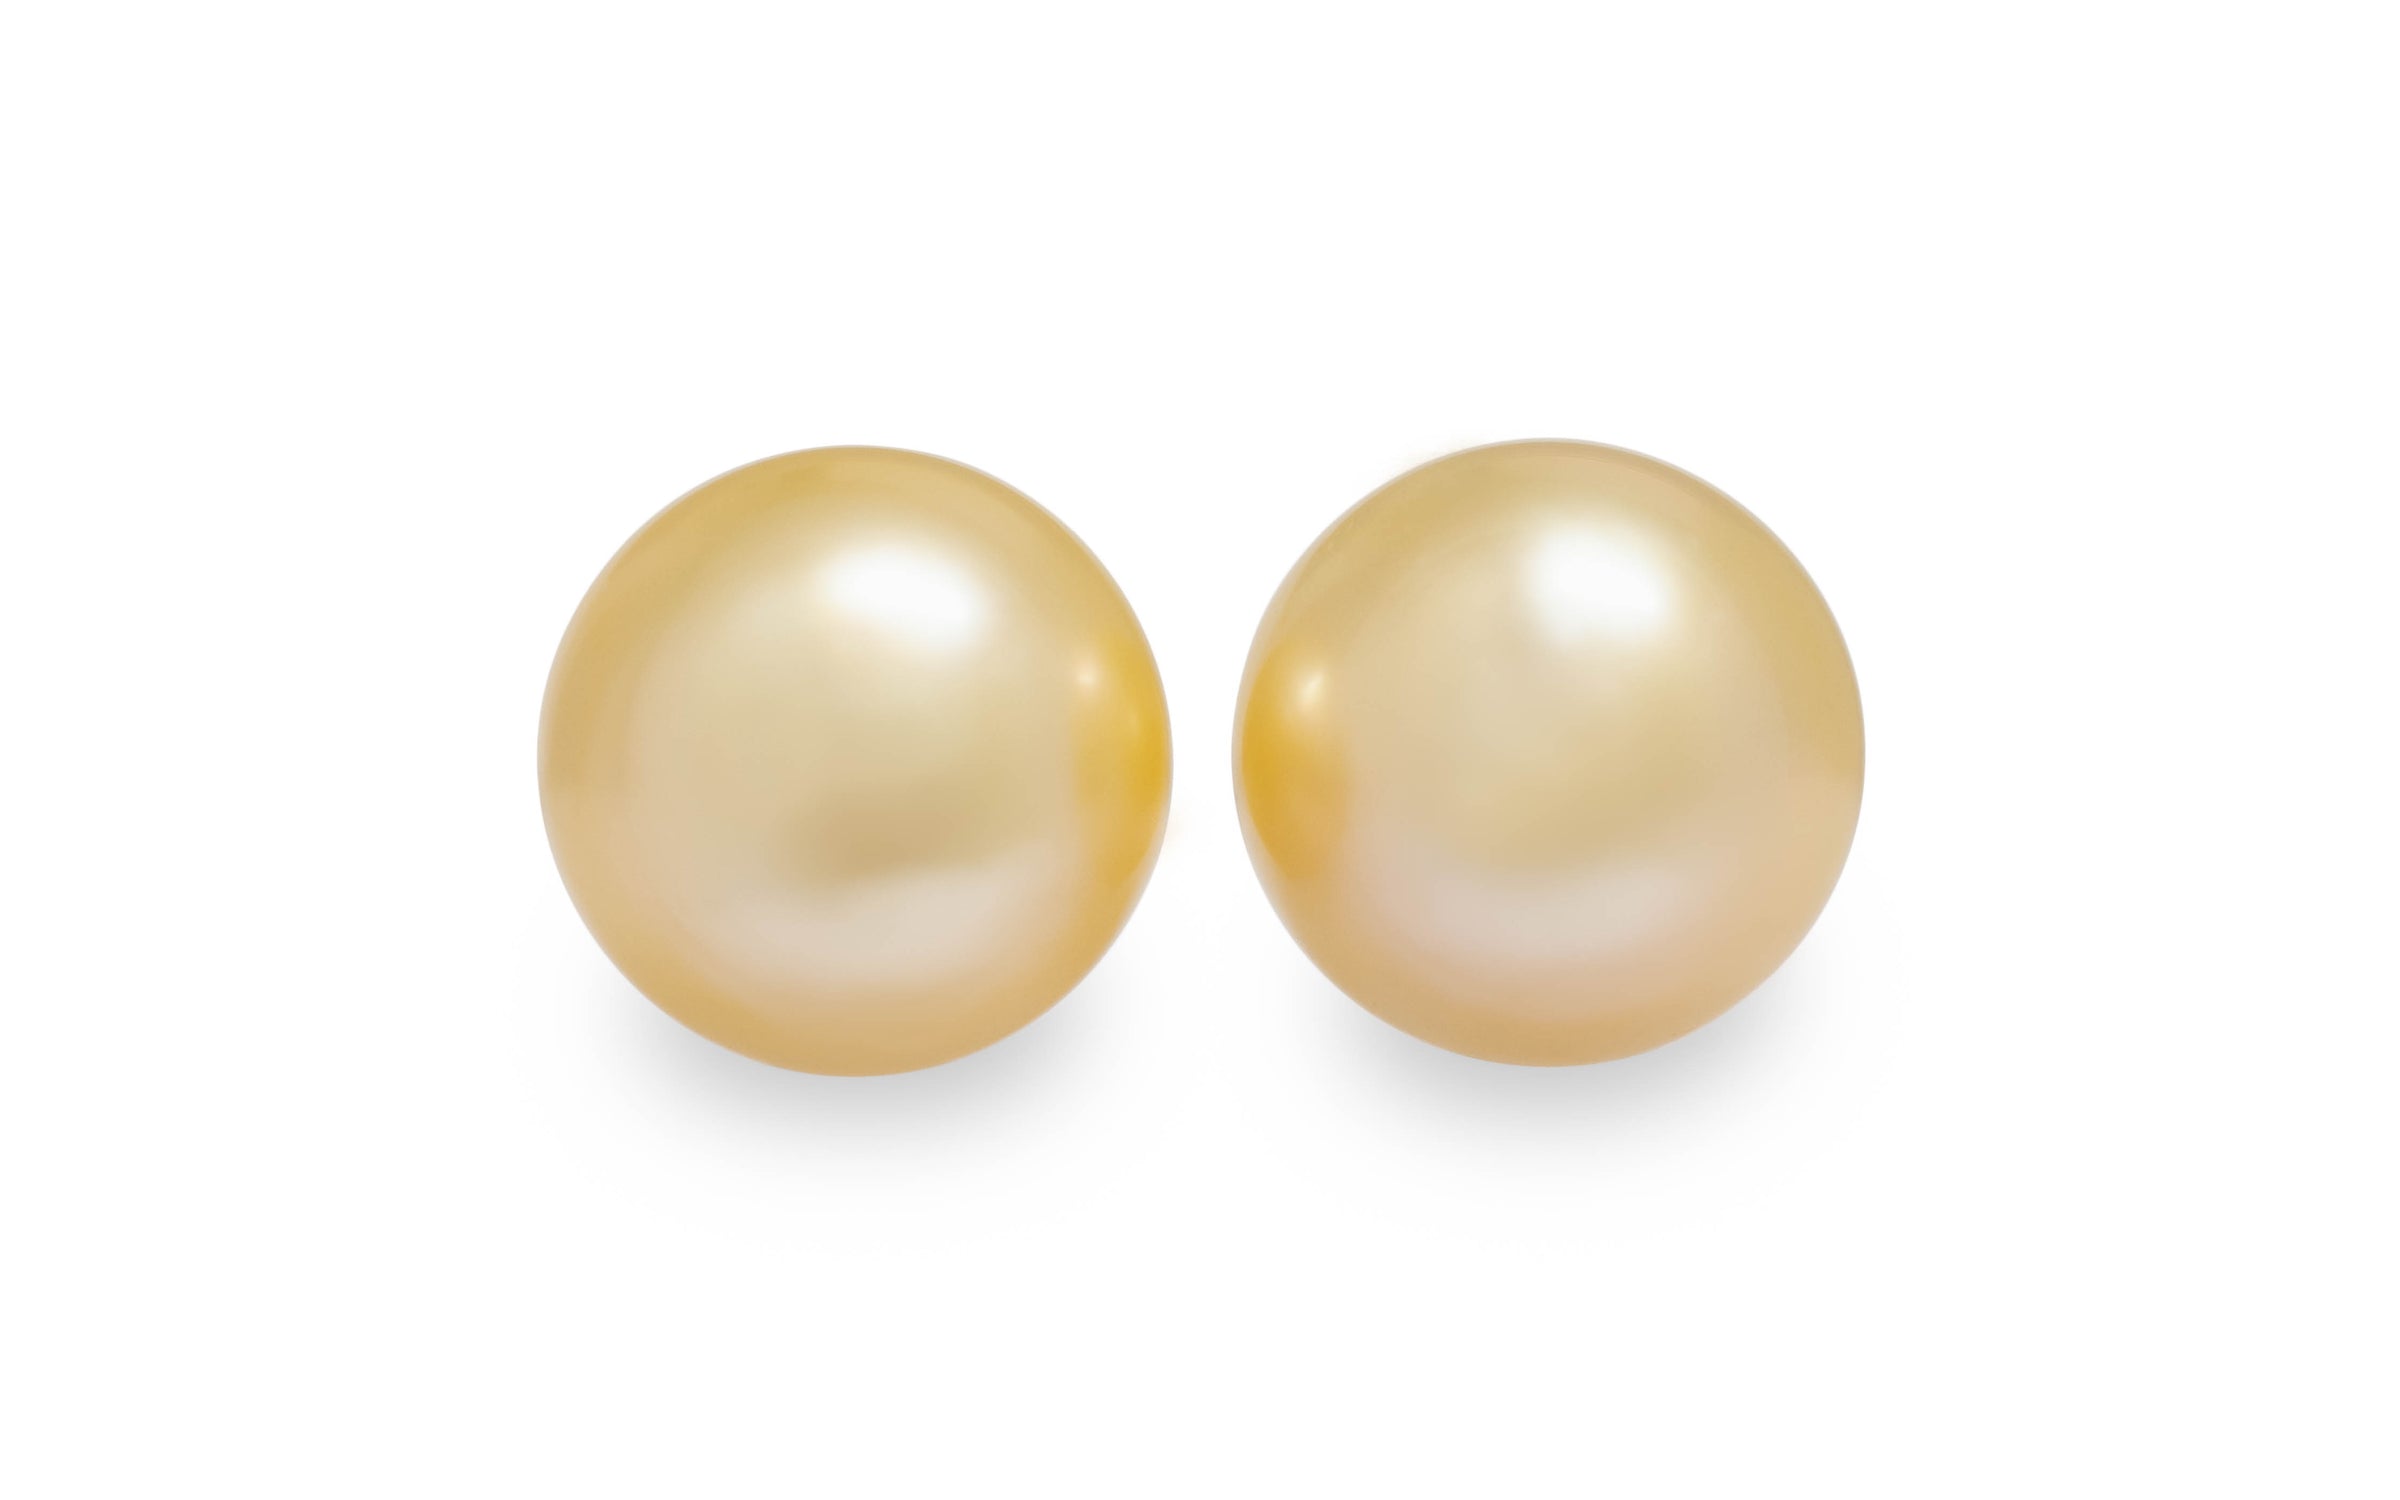 A pair of round golden South Sea pearls are displayed on a white background.